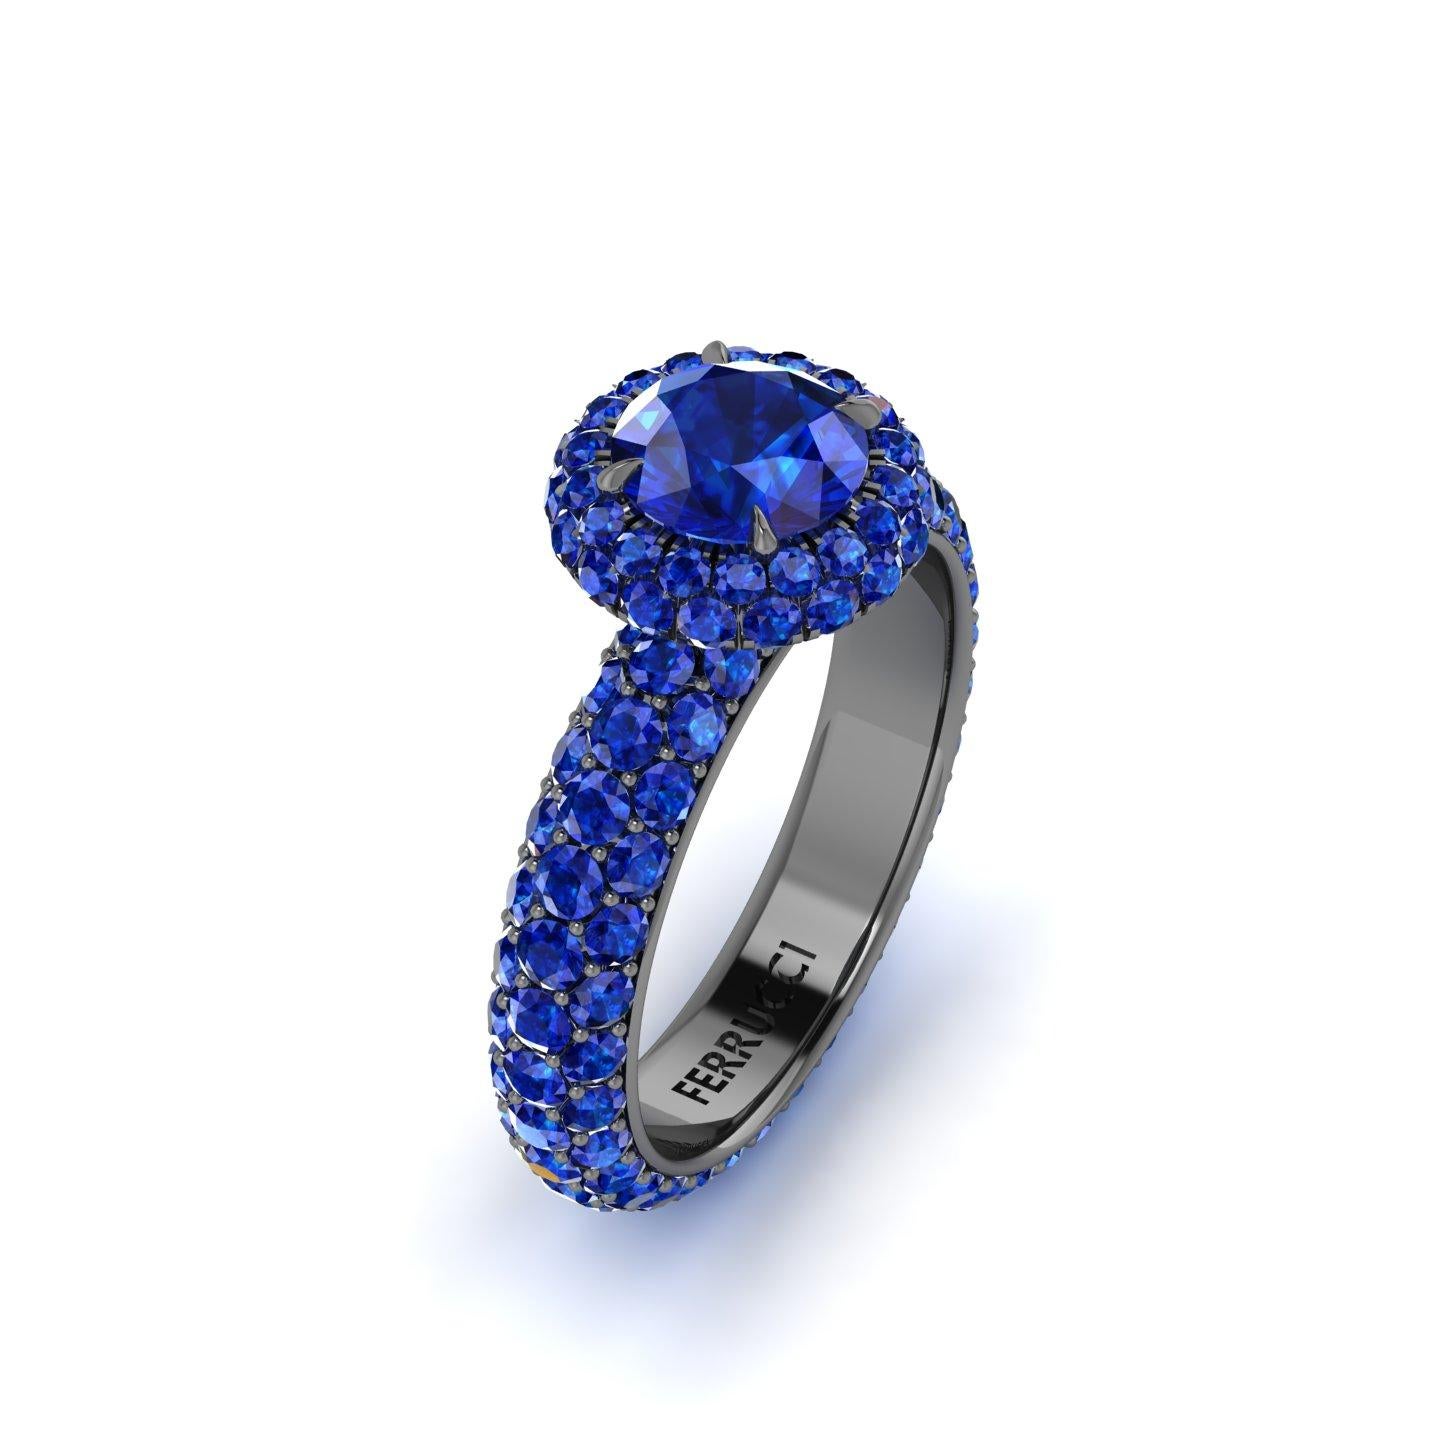 1.16 carat center Round Blue Sapphire set in a Double Round Sapphire Halo and a triple pave' set Sapphire shank eternity style ring, with a total of 132 Sapphires and an approximate total carat weight of 3.96 carats.

Entirely made in New York City